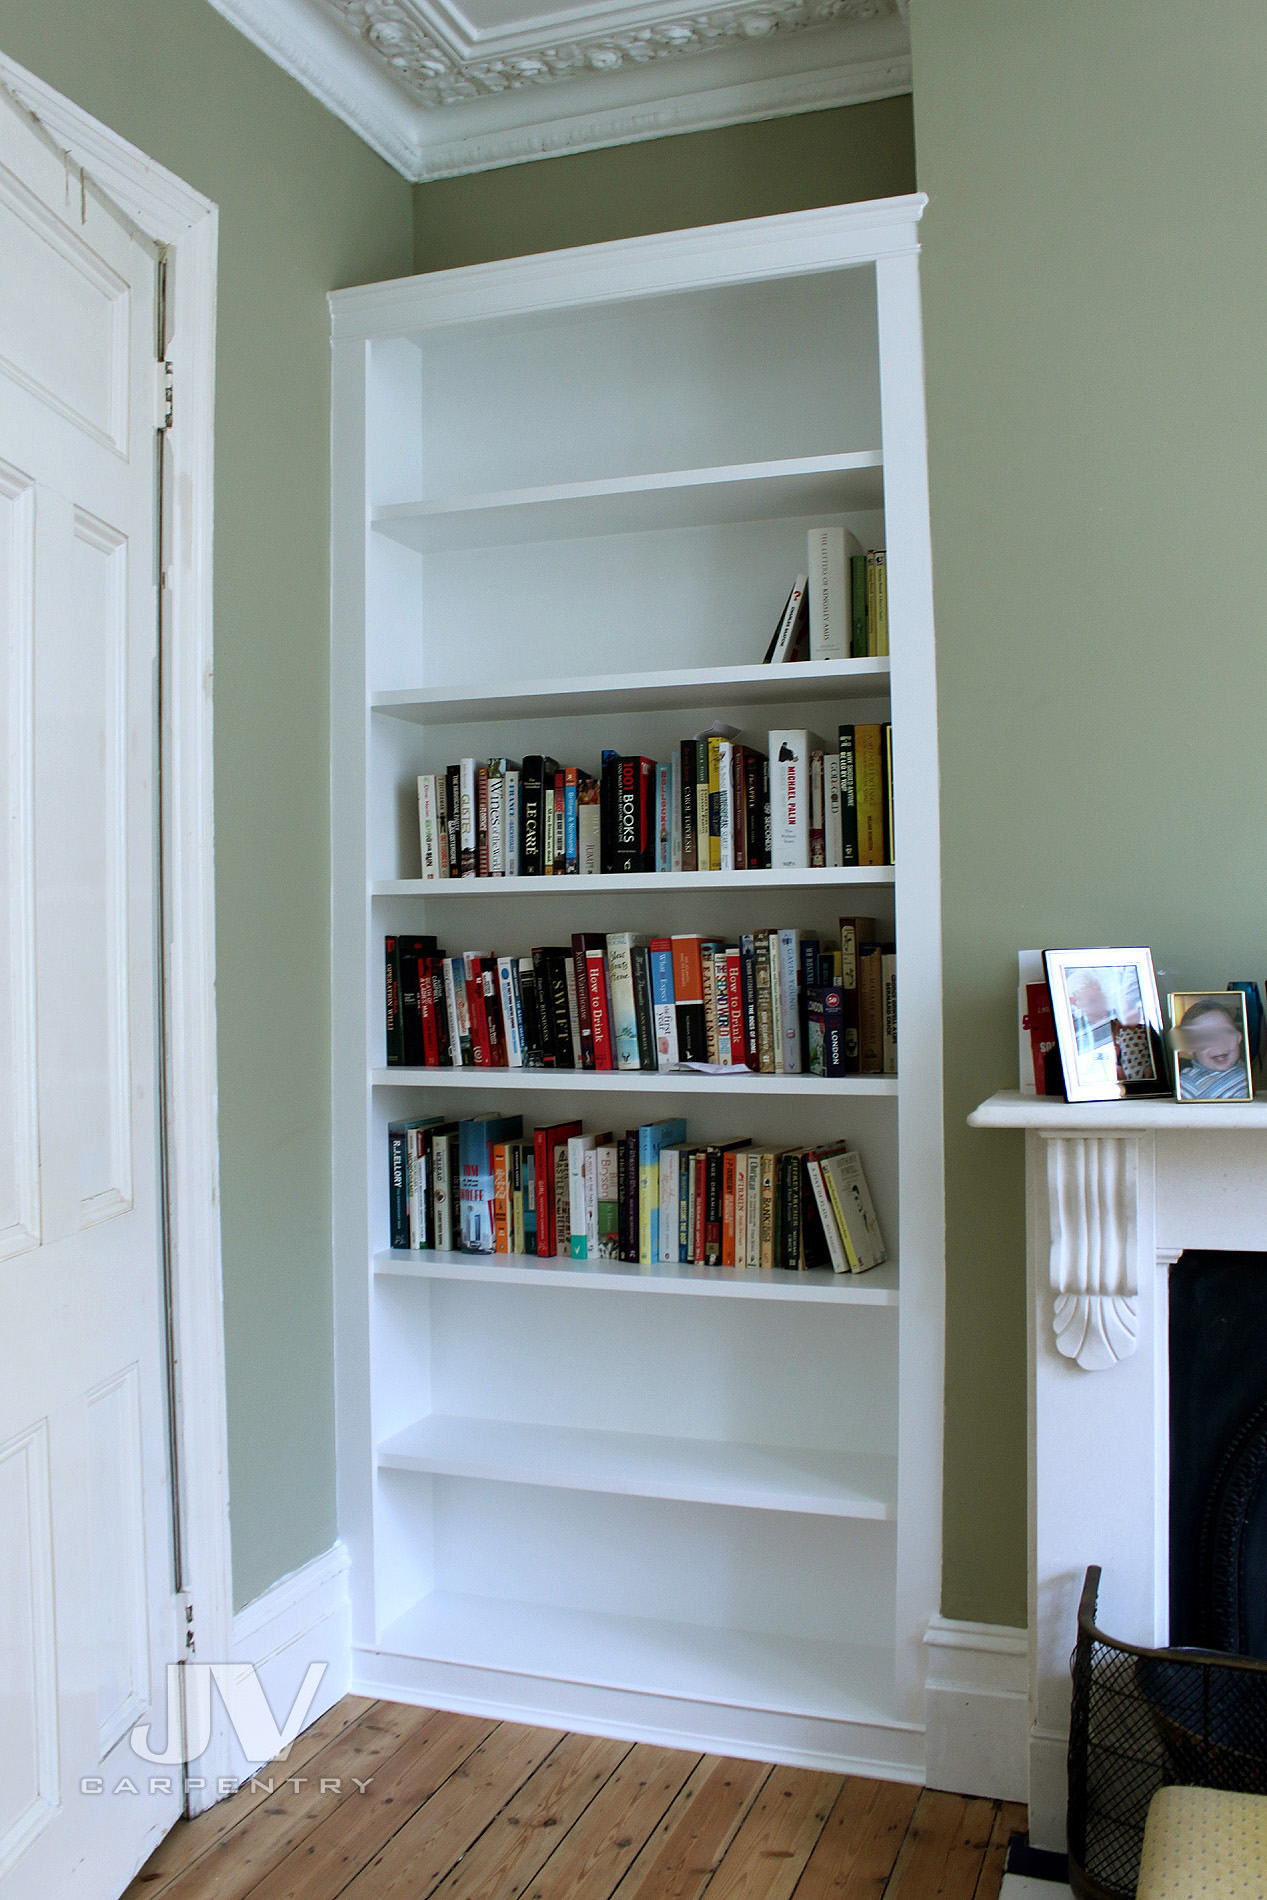 shelving alcove unit with shelves from top to bottom